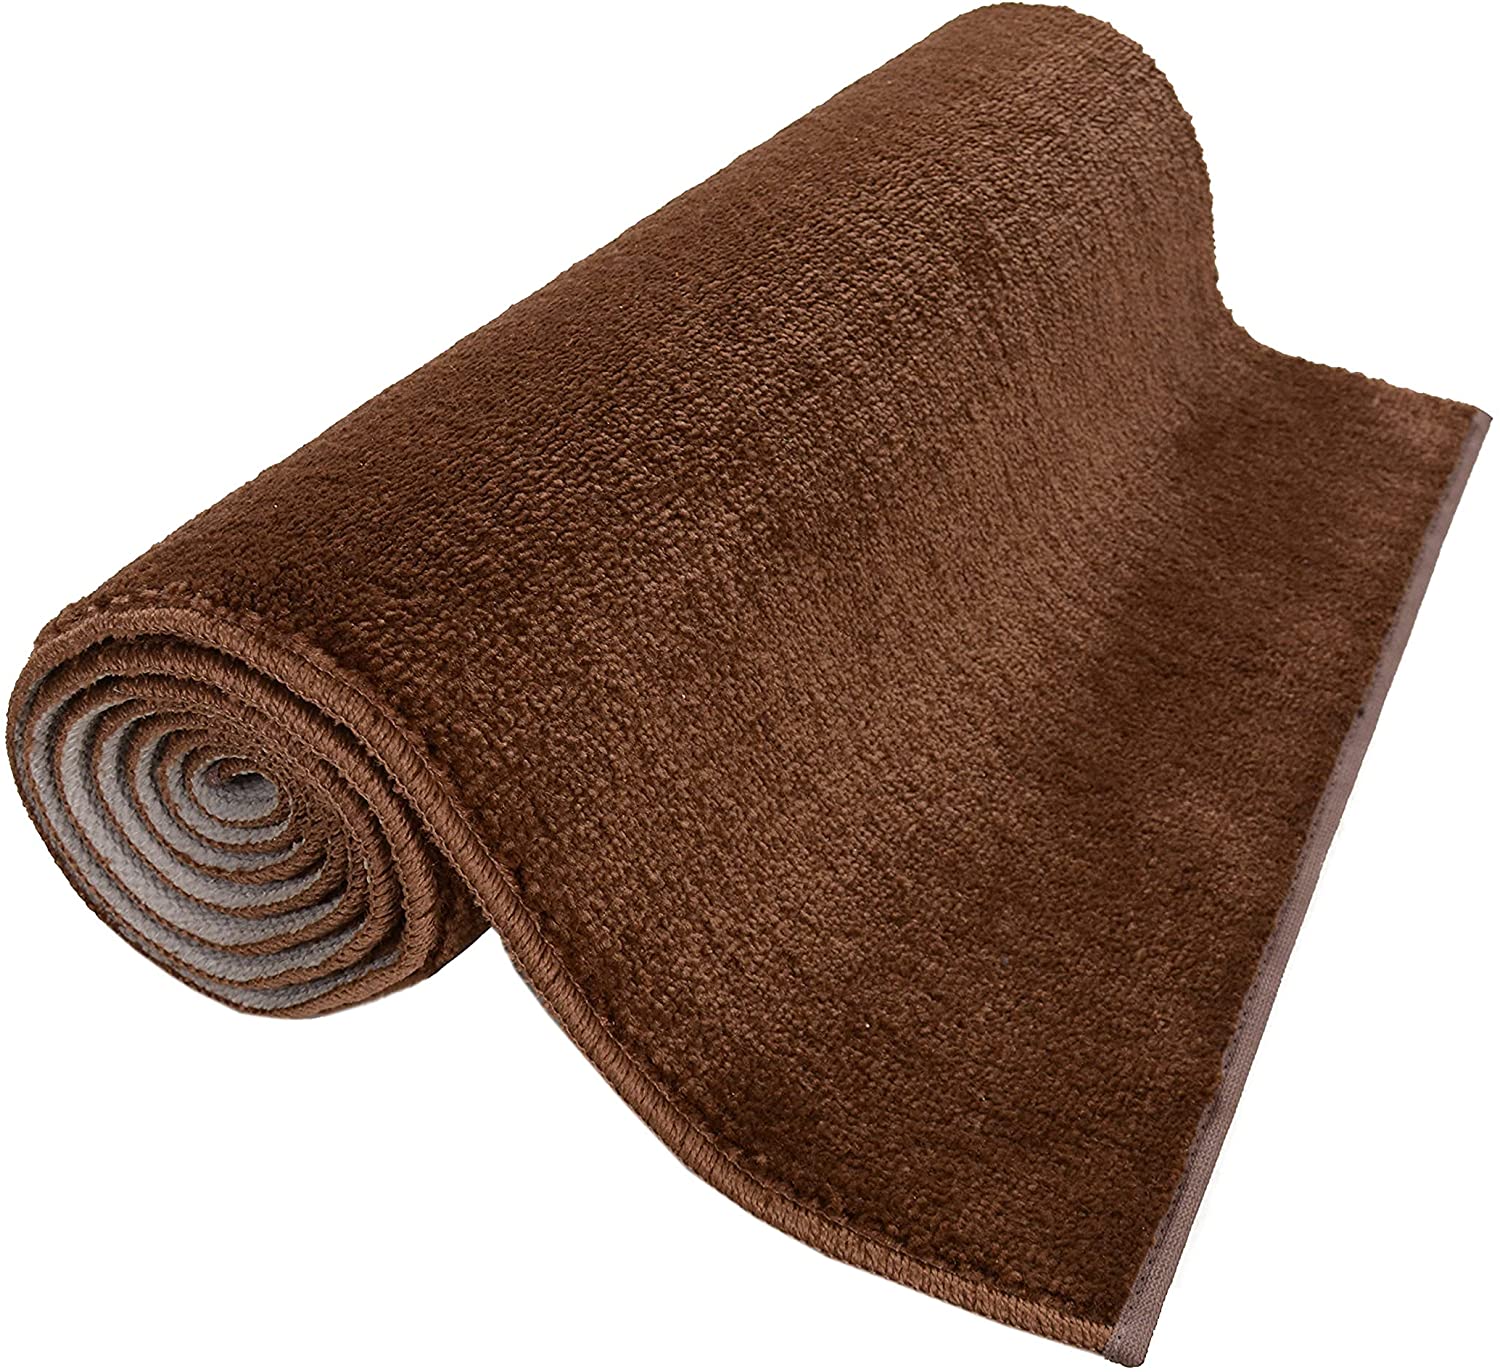 Machine Washable Custom Size Runner Rug Copper Brown Color Skid Resistant Rug Runner Customize Up to 50 Feet and 30 Inch Width Runner Rug-8